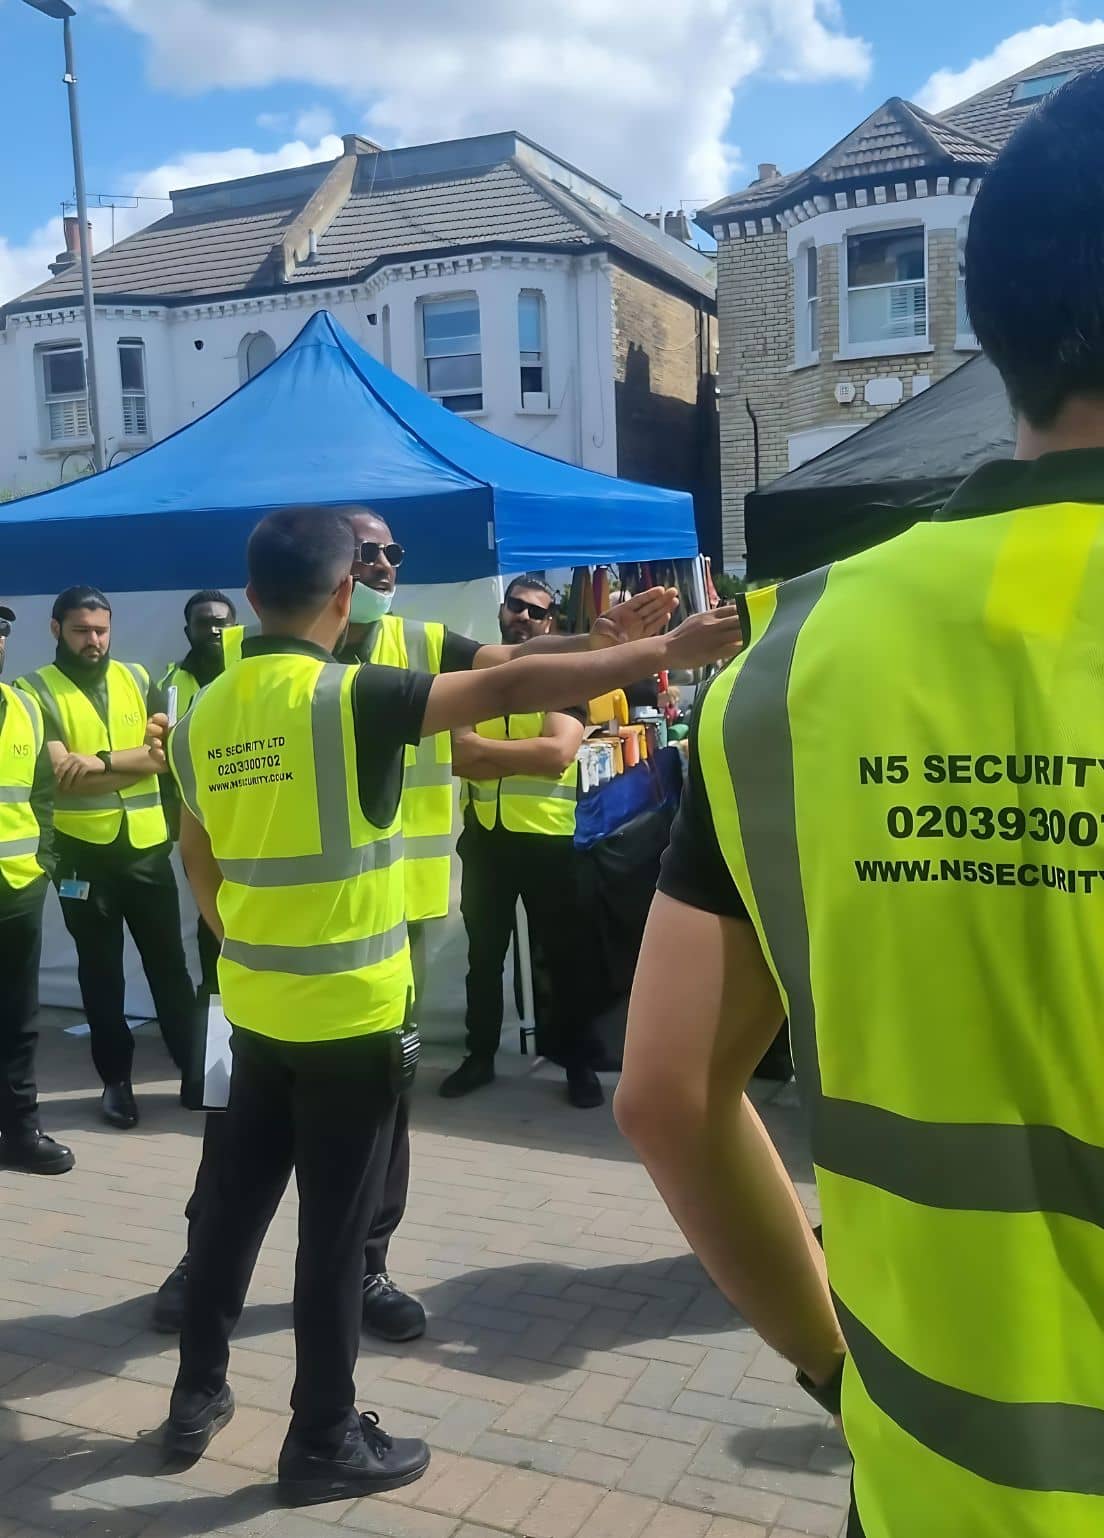 STEWARDING SECURITY SERVICES IN LONDON